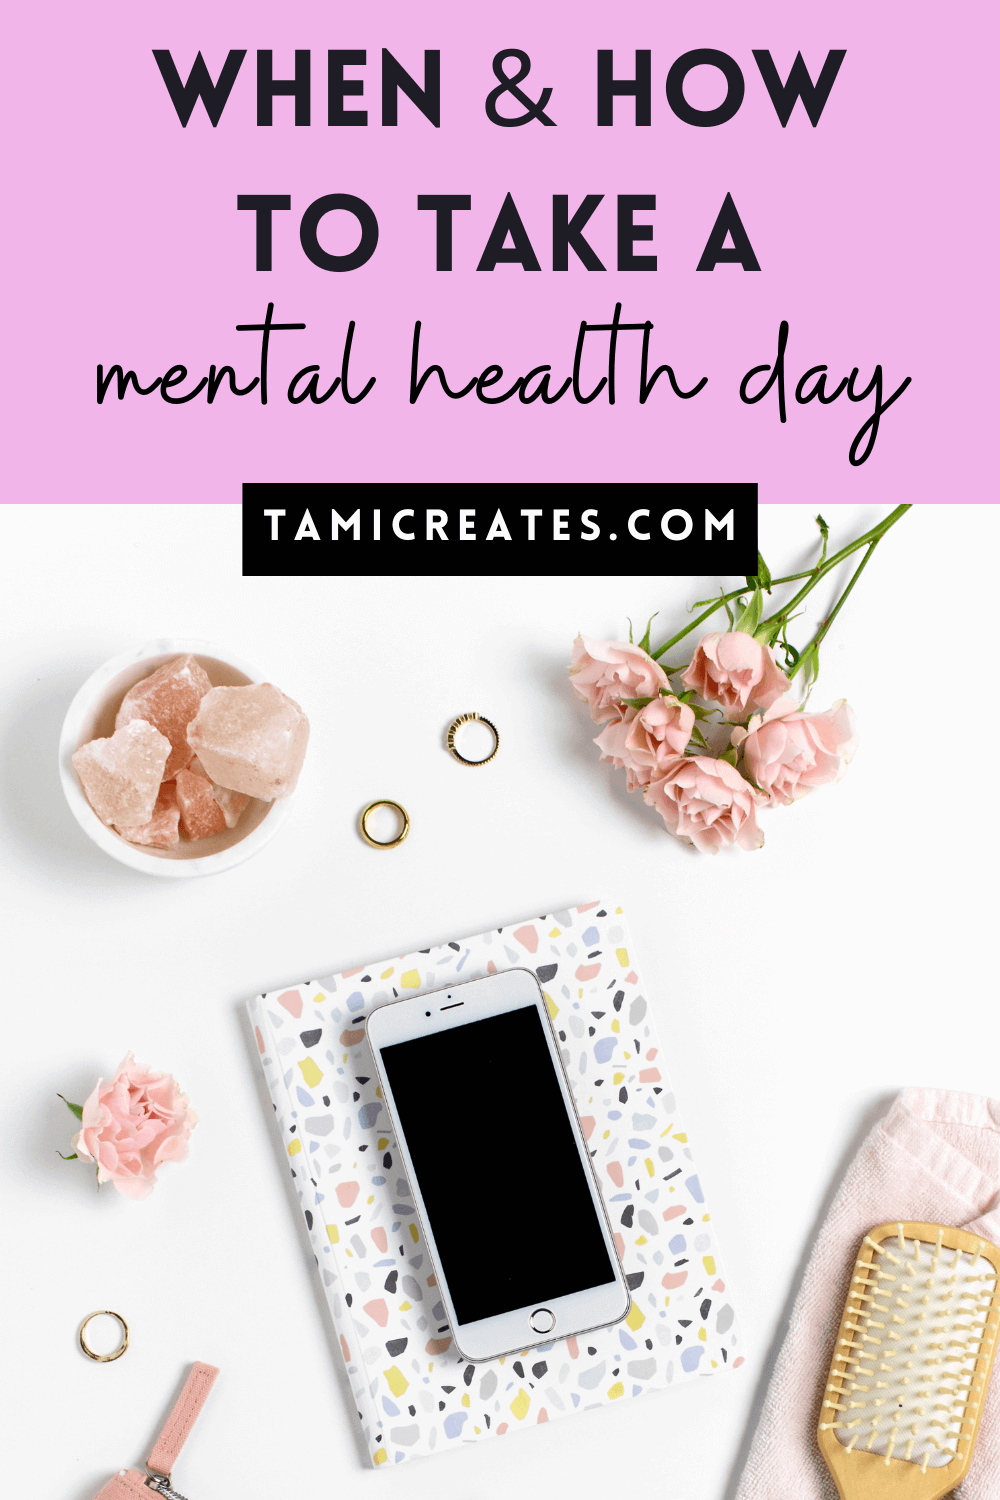 Even if you don't struggle with mental illness, mental health days might still be a necessity. They allow you to reset, recharge and take a much-needed break. Here's when and how to take a mental health day off - if and when you need one!